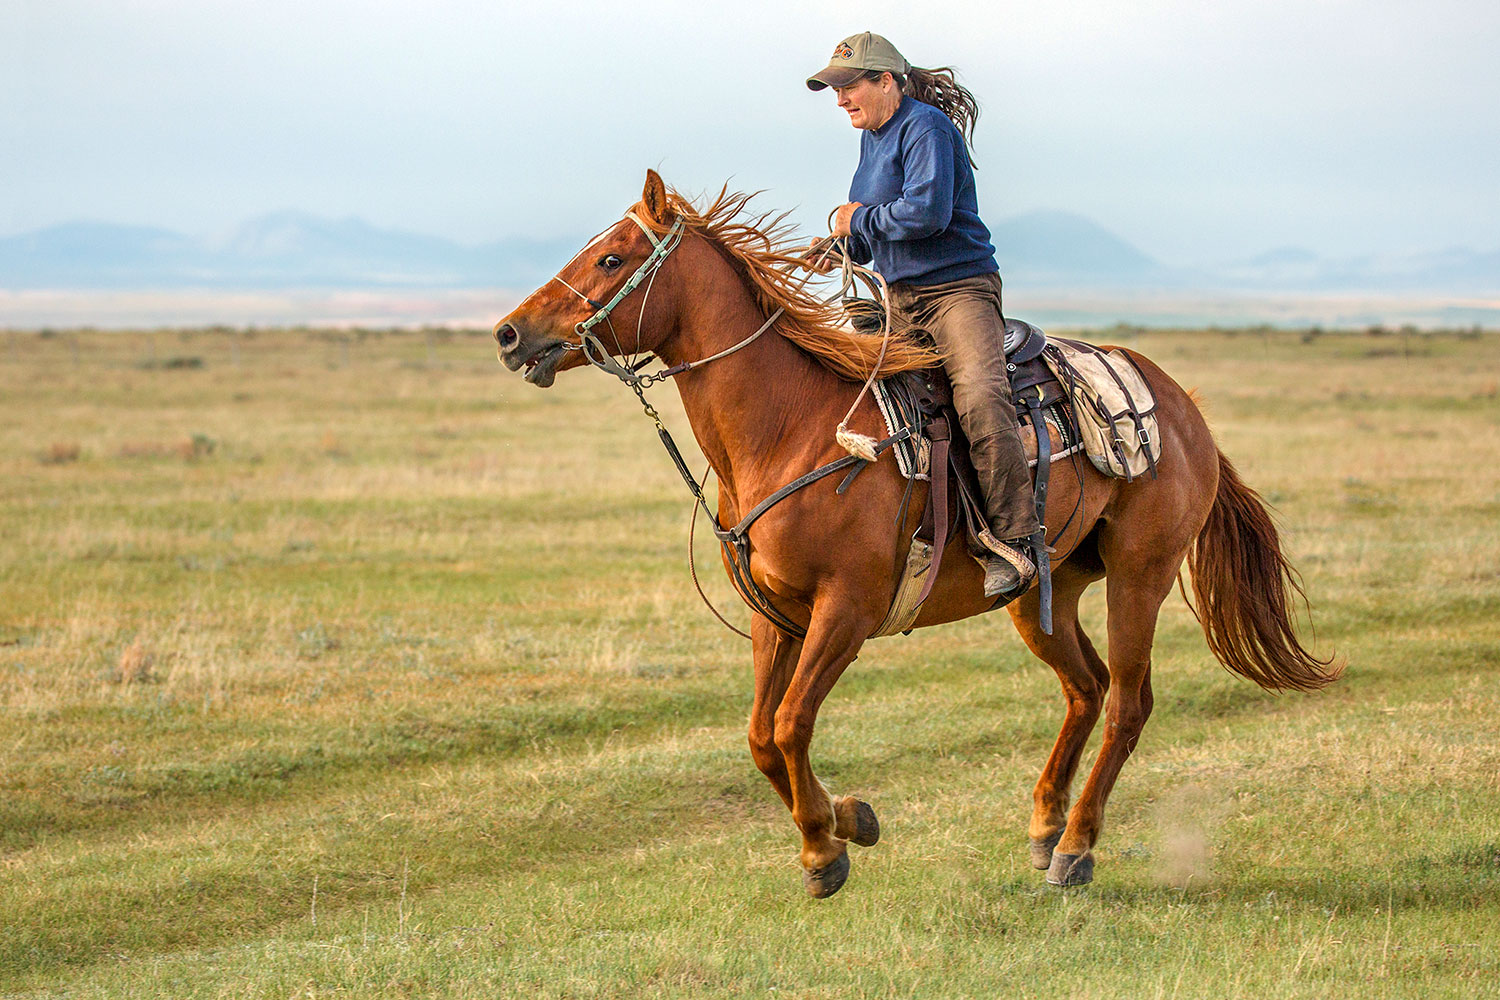 A photo of a cowgirl and also a rancher riding her quarter horse across the open plains after part of the herd that got away near Chinook, Montana.